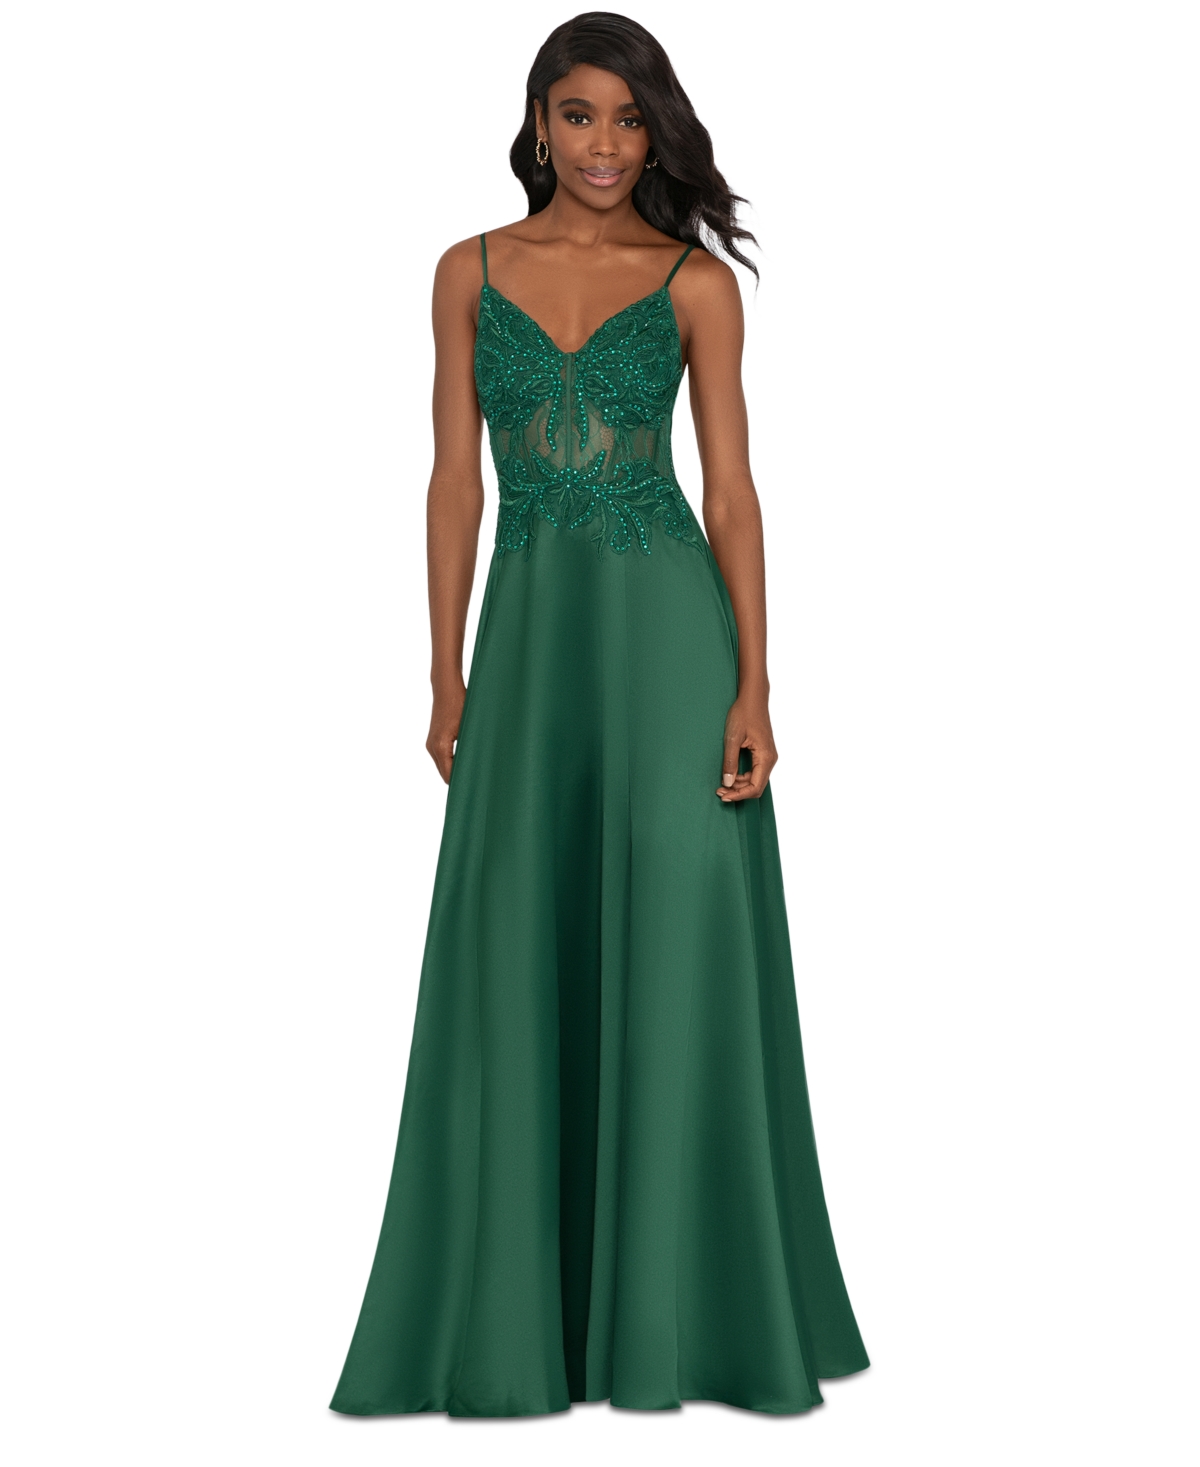 Blondie Nites Juniors' Sequined Embroidered-Bodice Gown, Created for Macy's